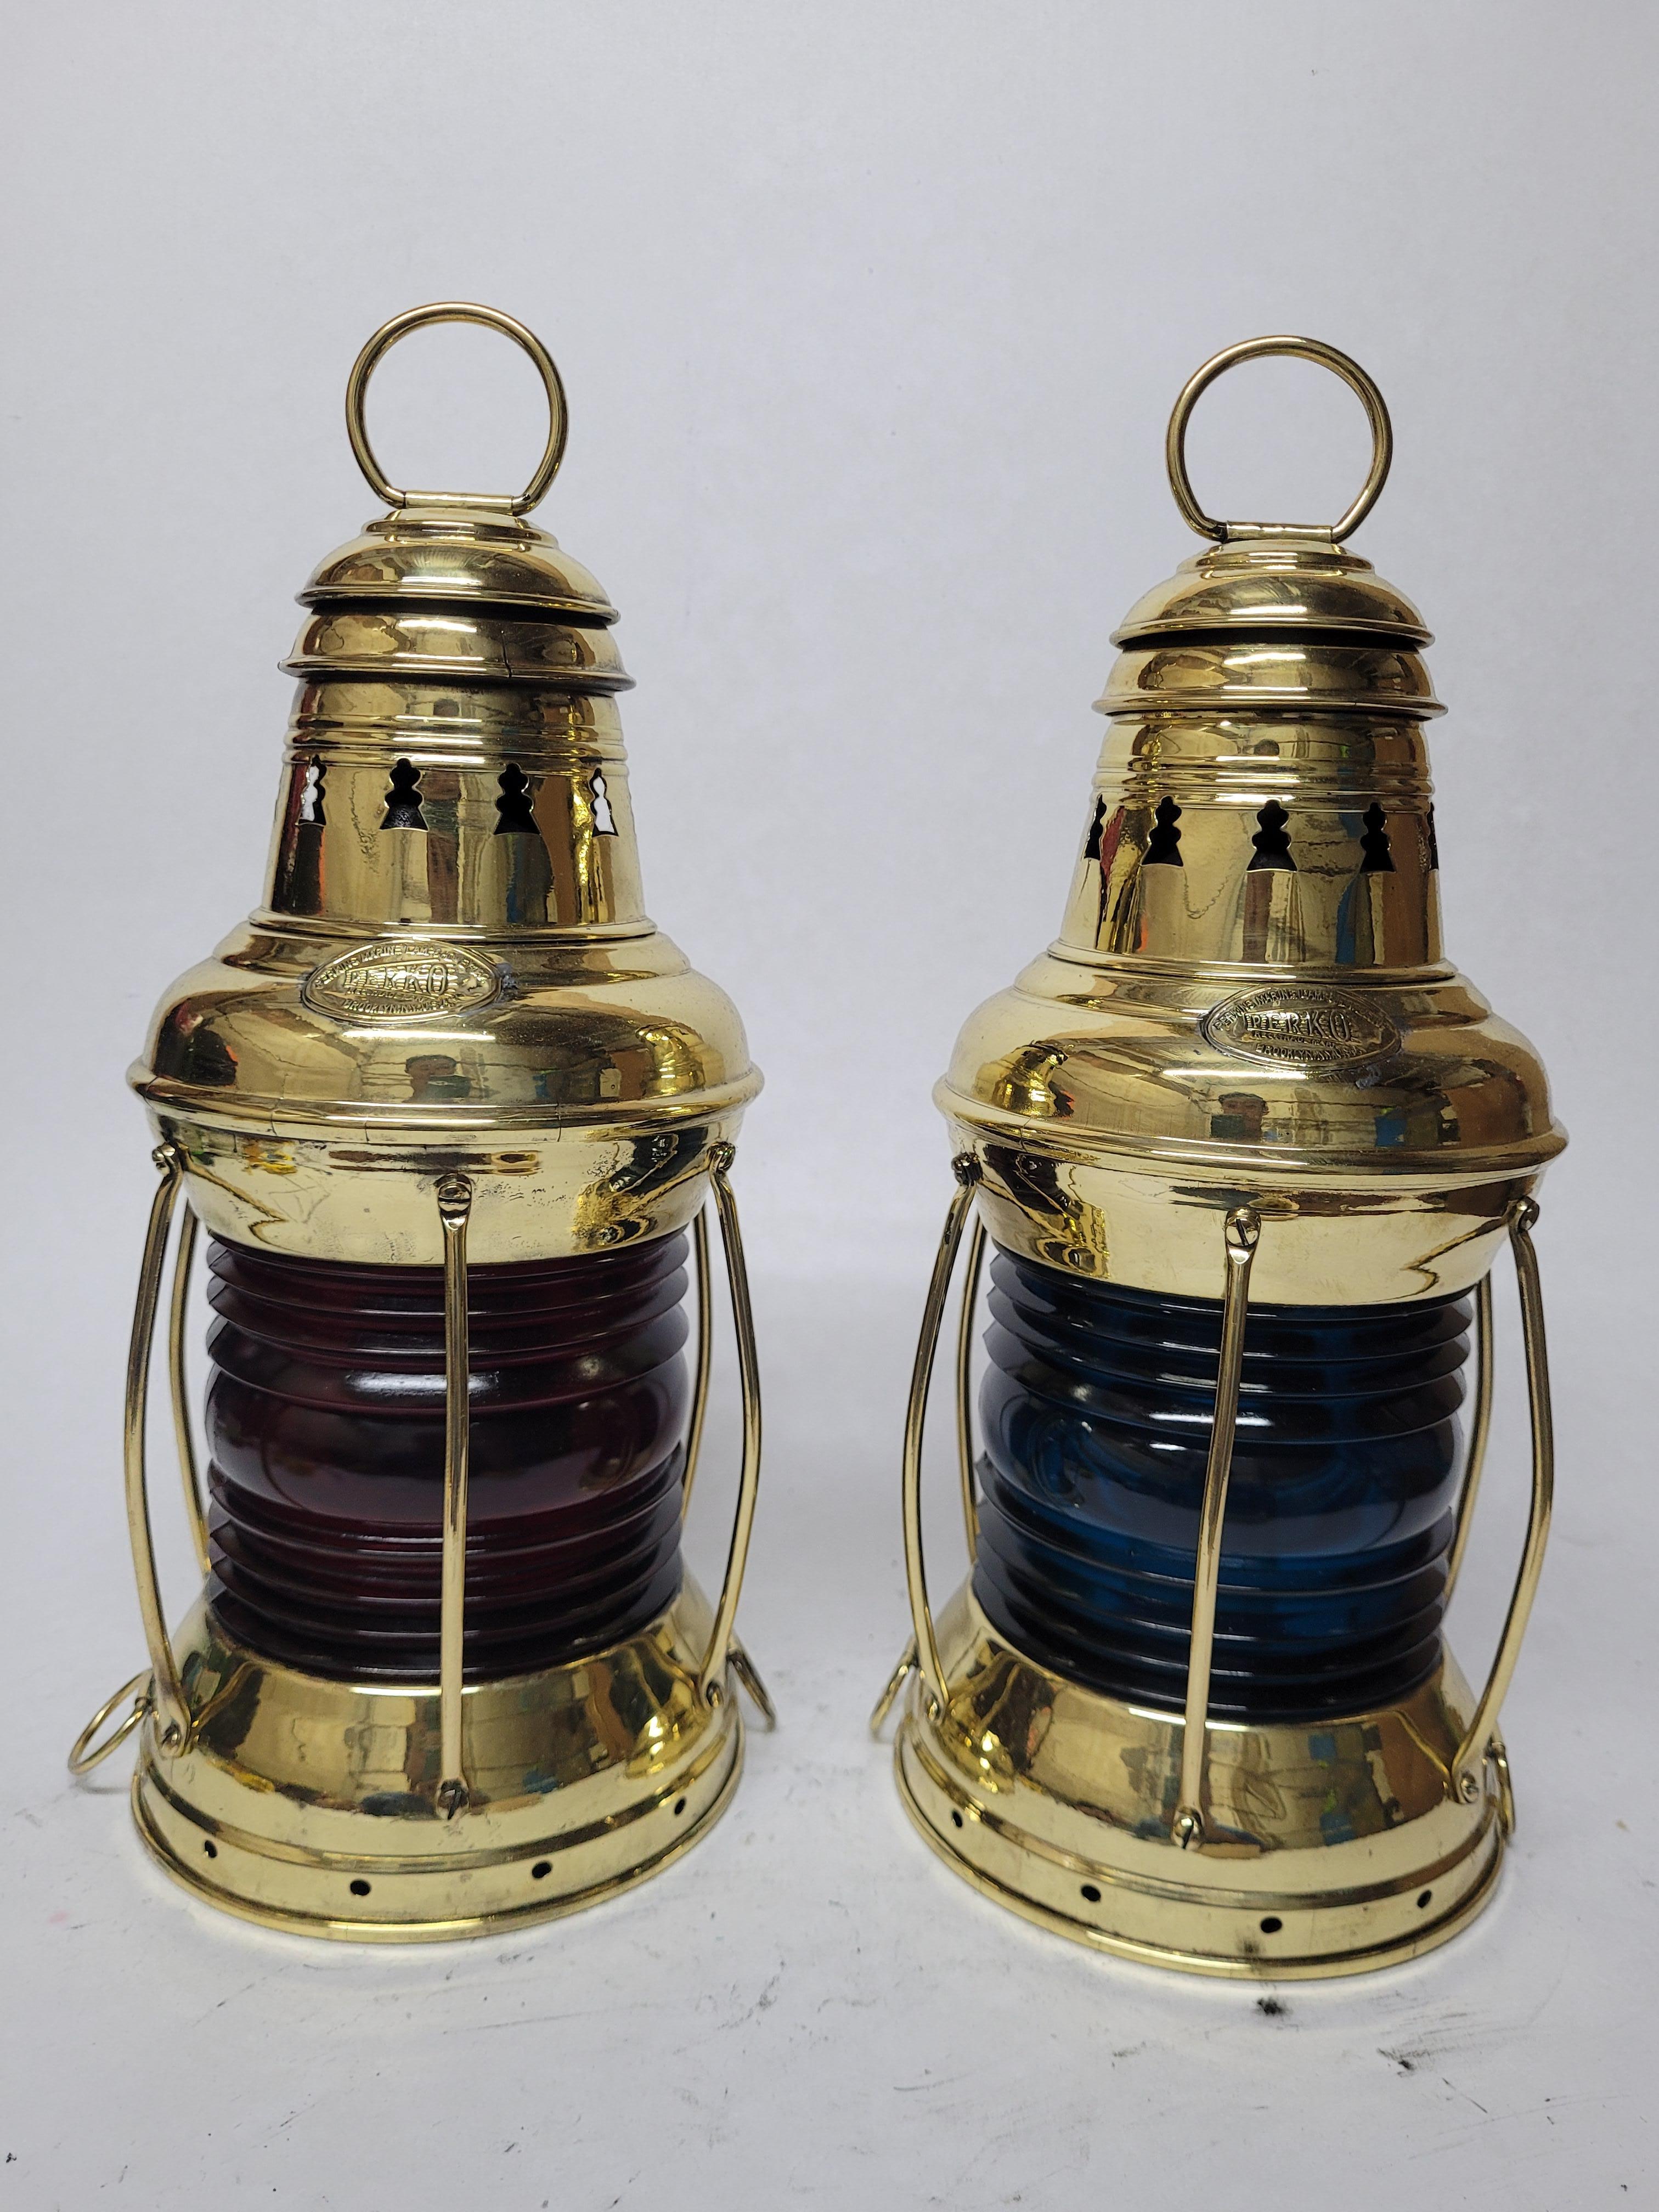 Pair of meticulously polished and lacqured marine lanterns by Perkins Marine Lamp Corporation of Brooklyn New York. Fitted with beautiful blue and red lenses. Vented tops with carry rings. Choice marine antiques. Circa 1935. American

Weight: 3.47